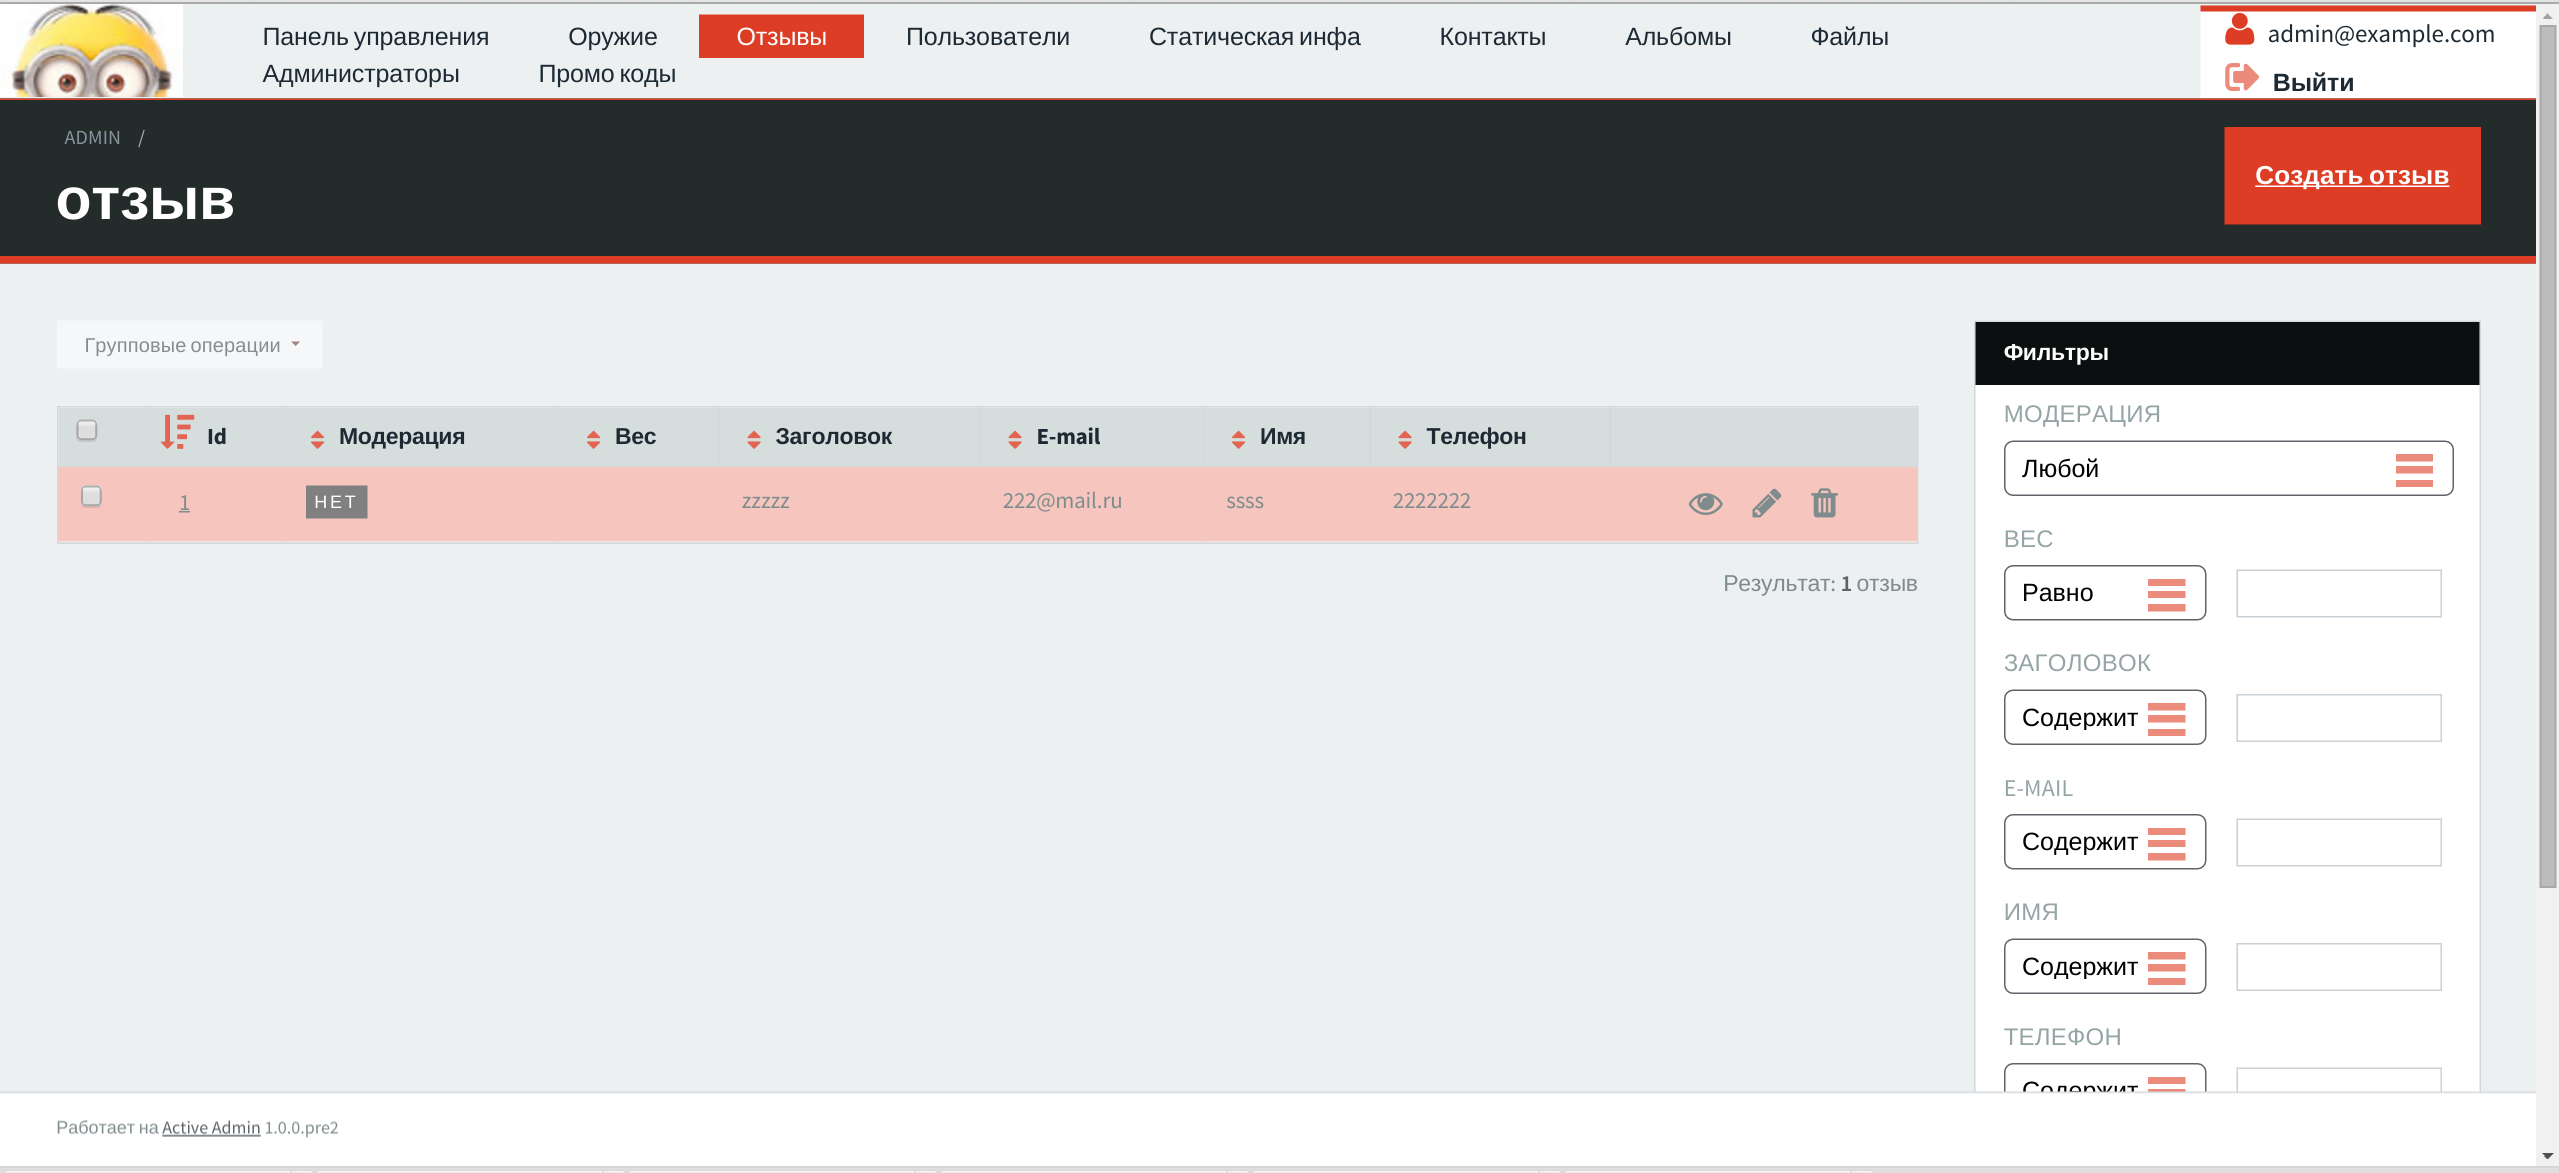 Beautiful themes for Rails ActiveAdmin: Face of Active Admin